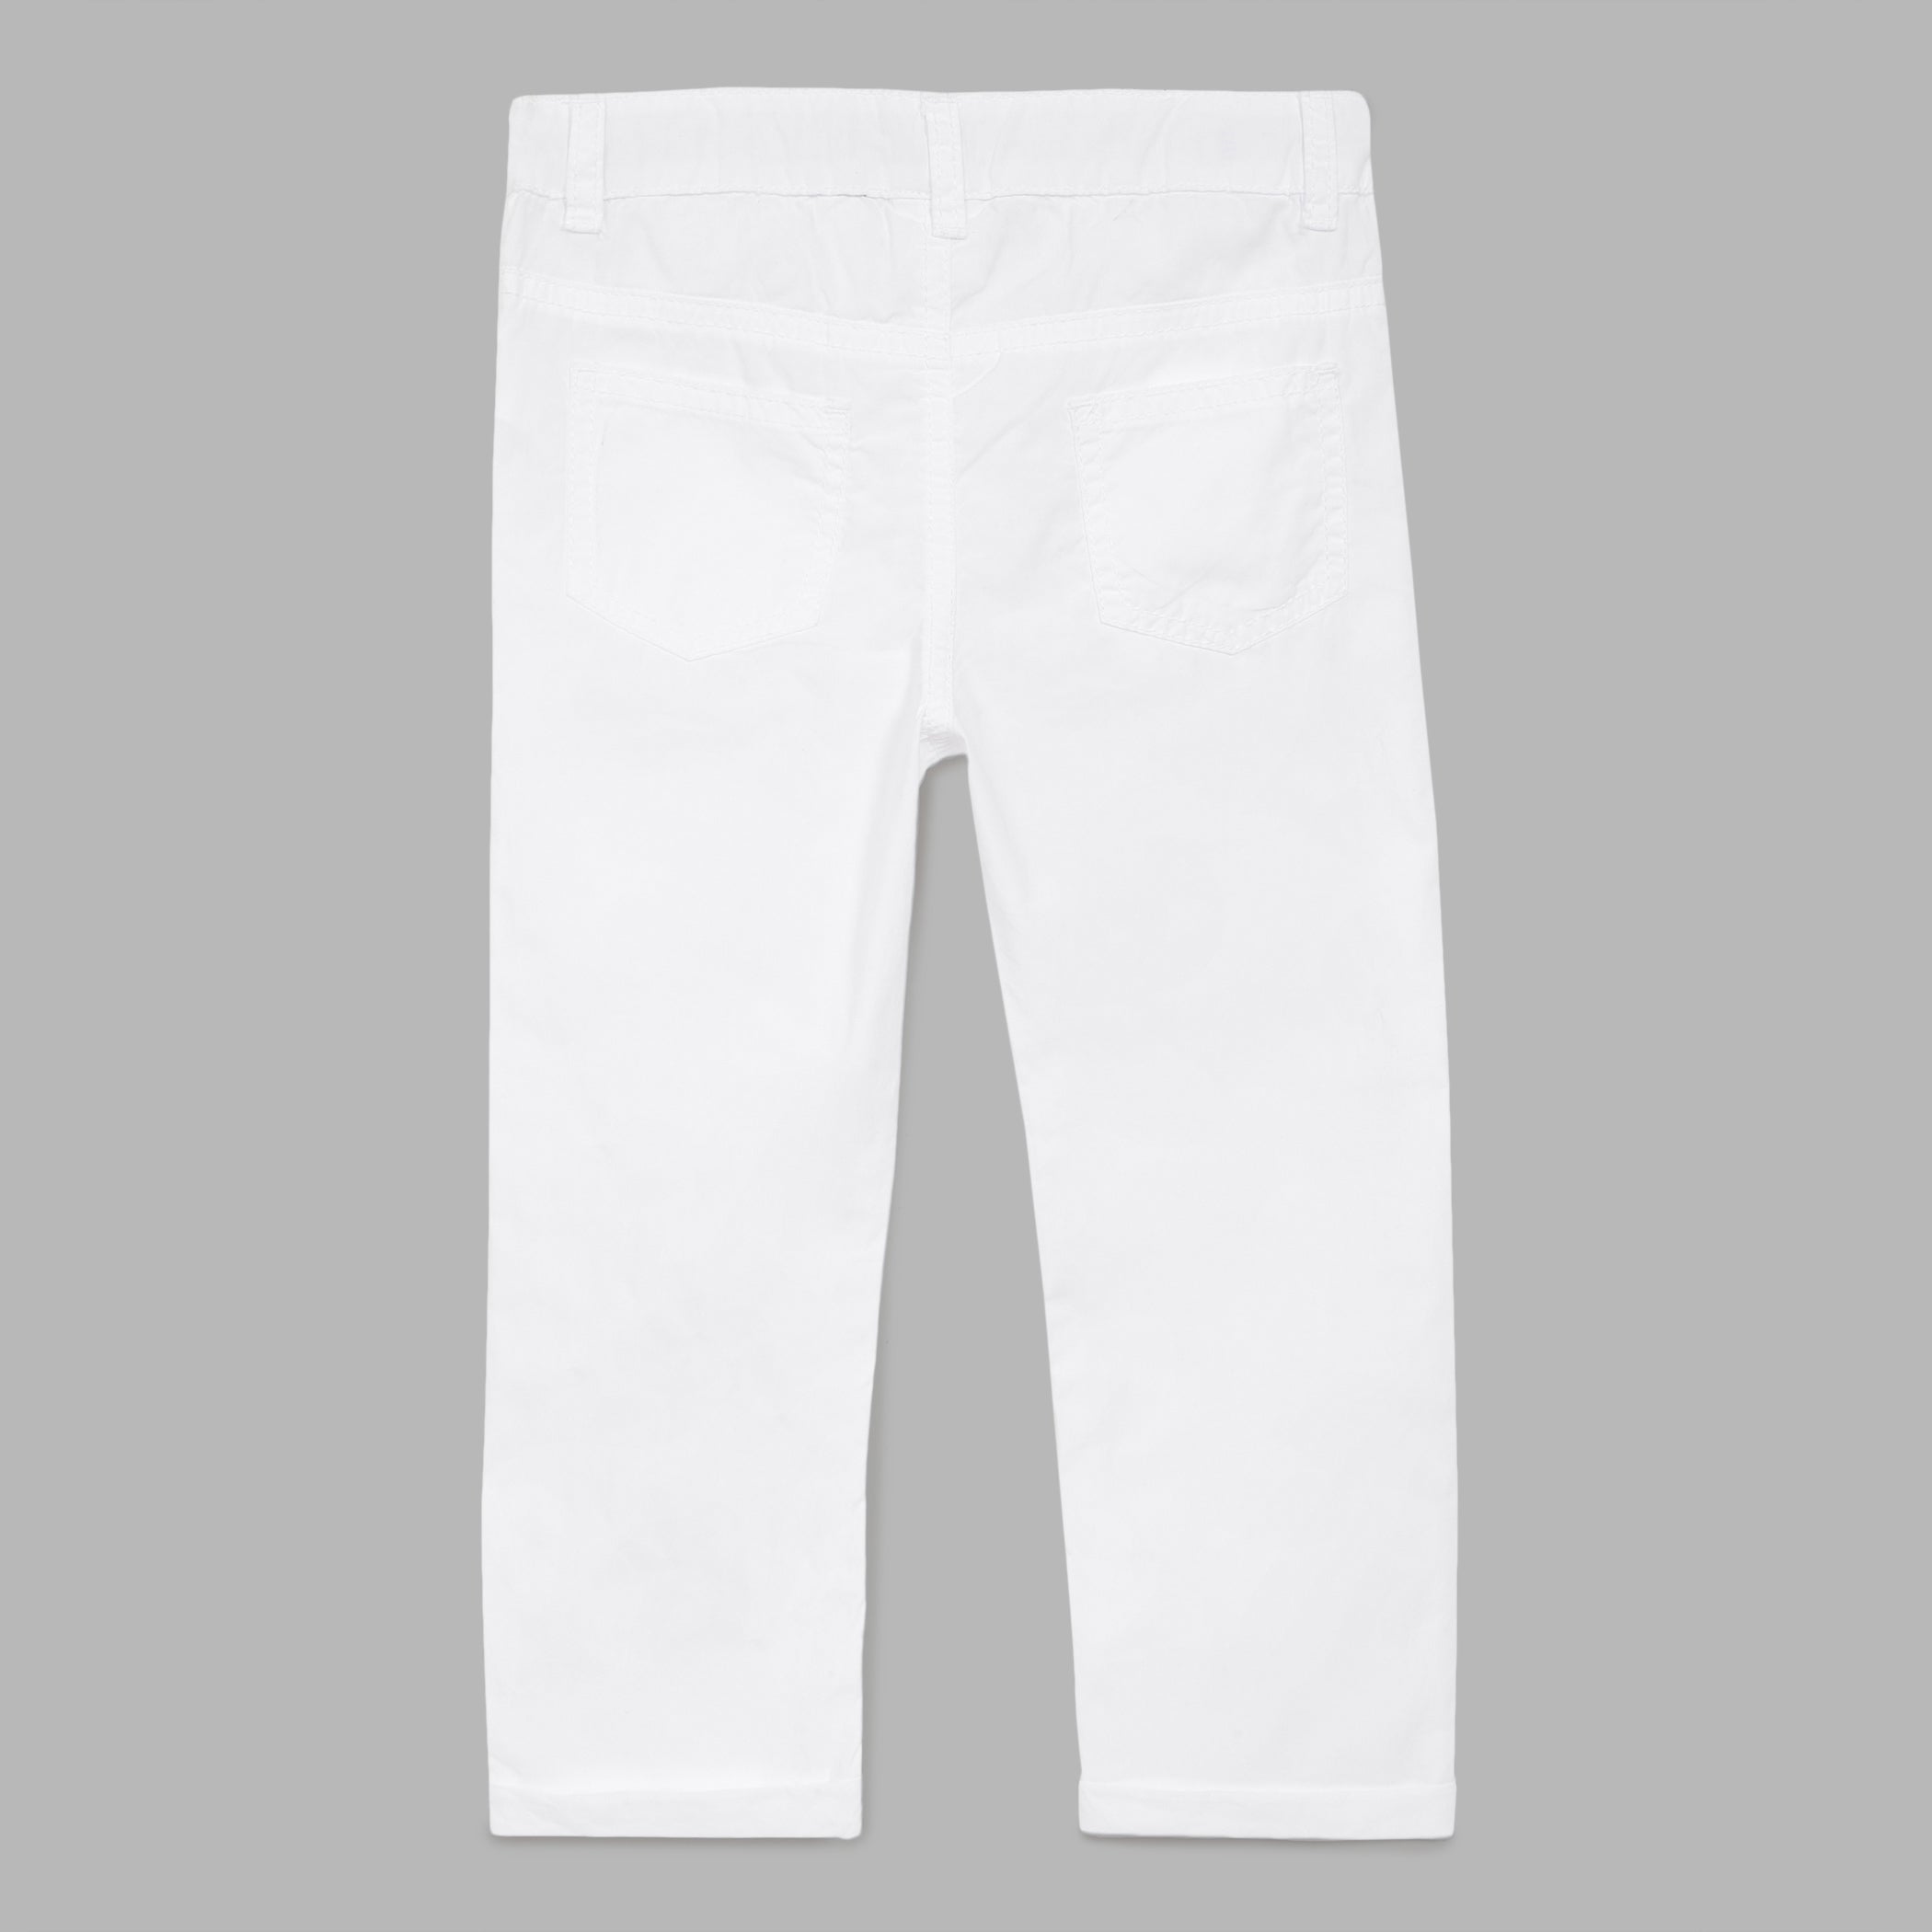 PALM ANGELS KIDS: Navy Blue & White Trousers for Kids